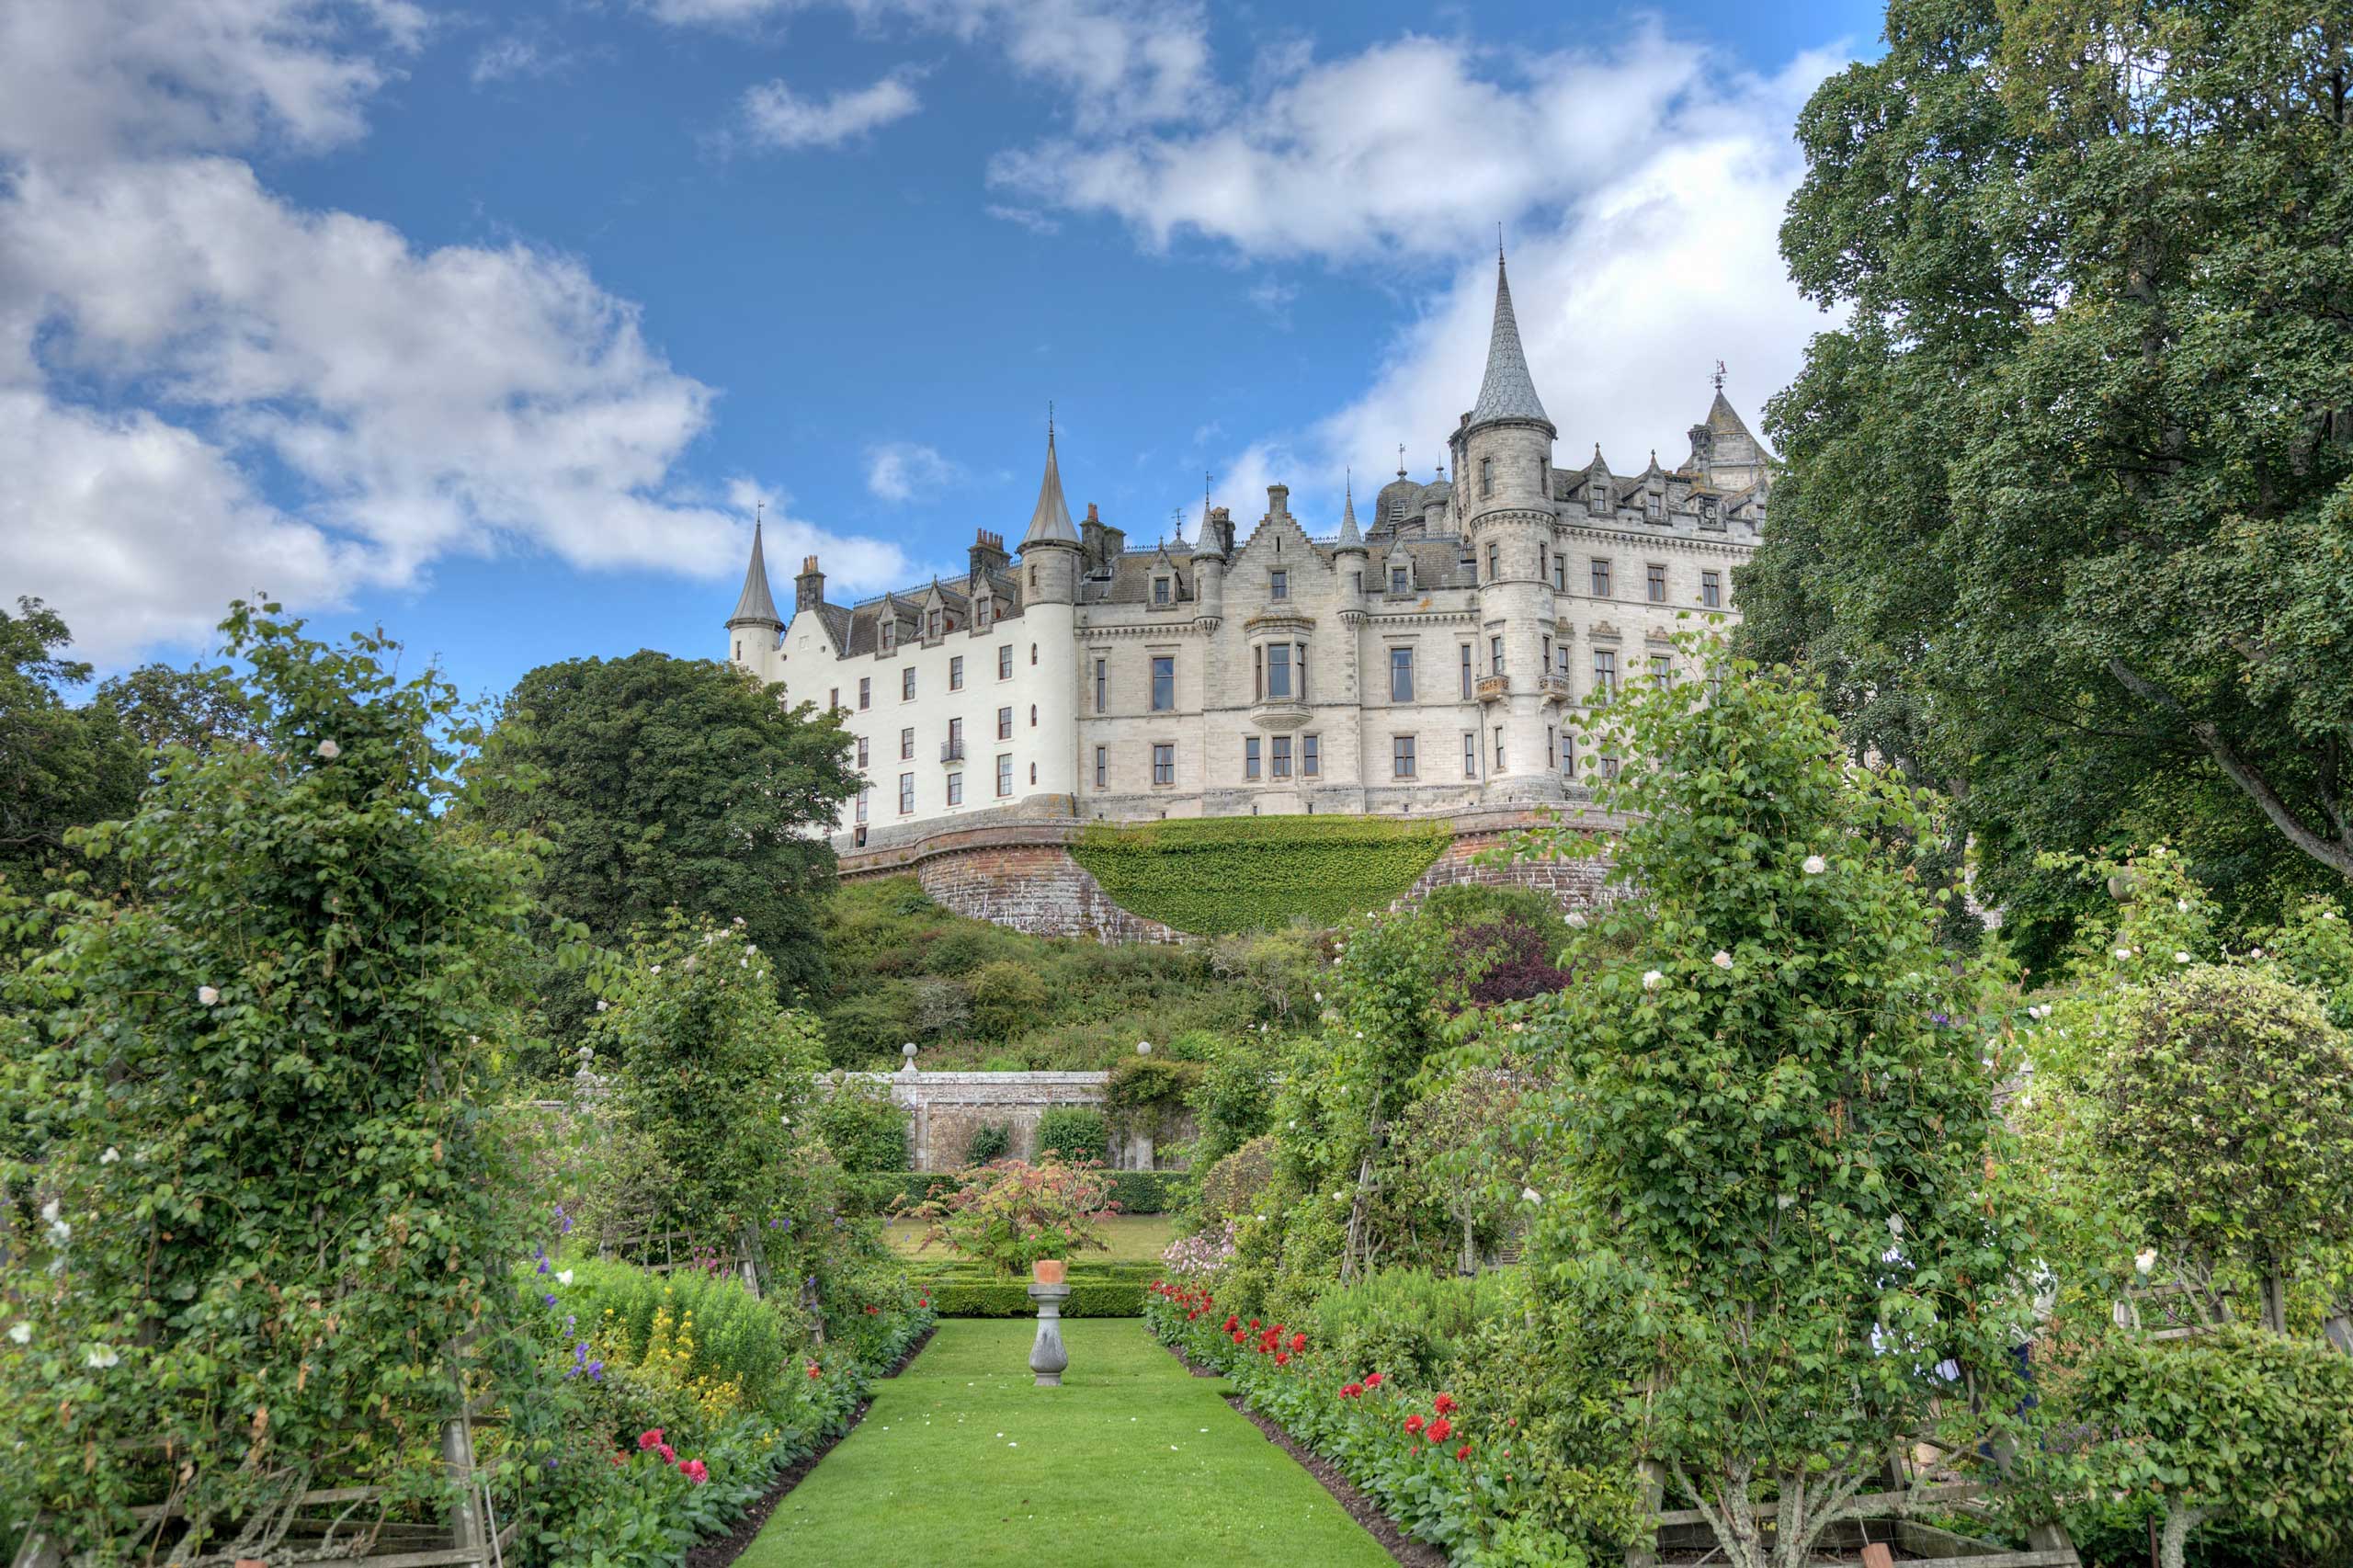 Dunrobin Castle, one of the Castles along the North Coast 500 route.